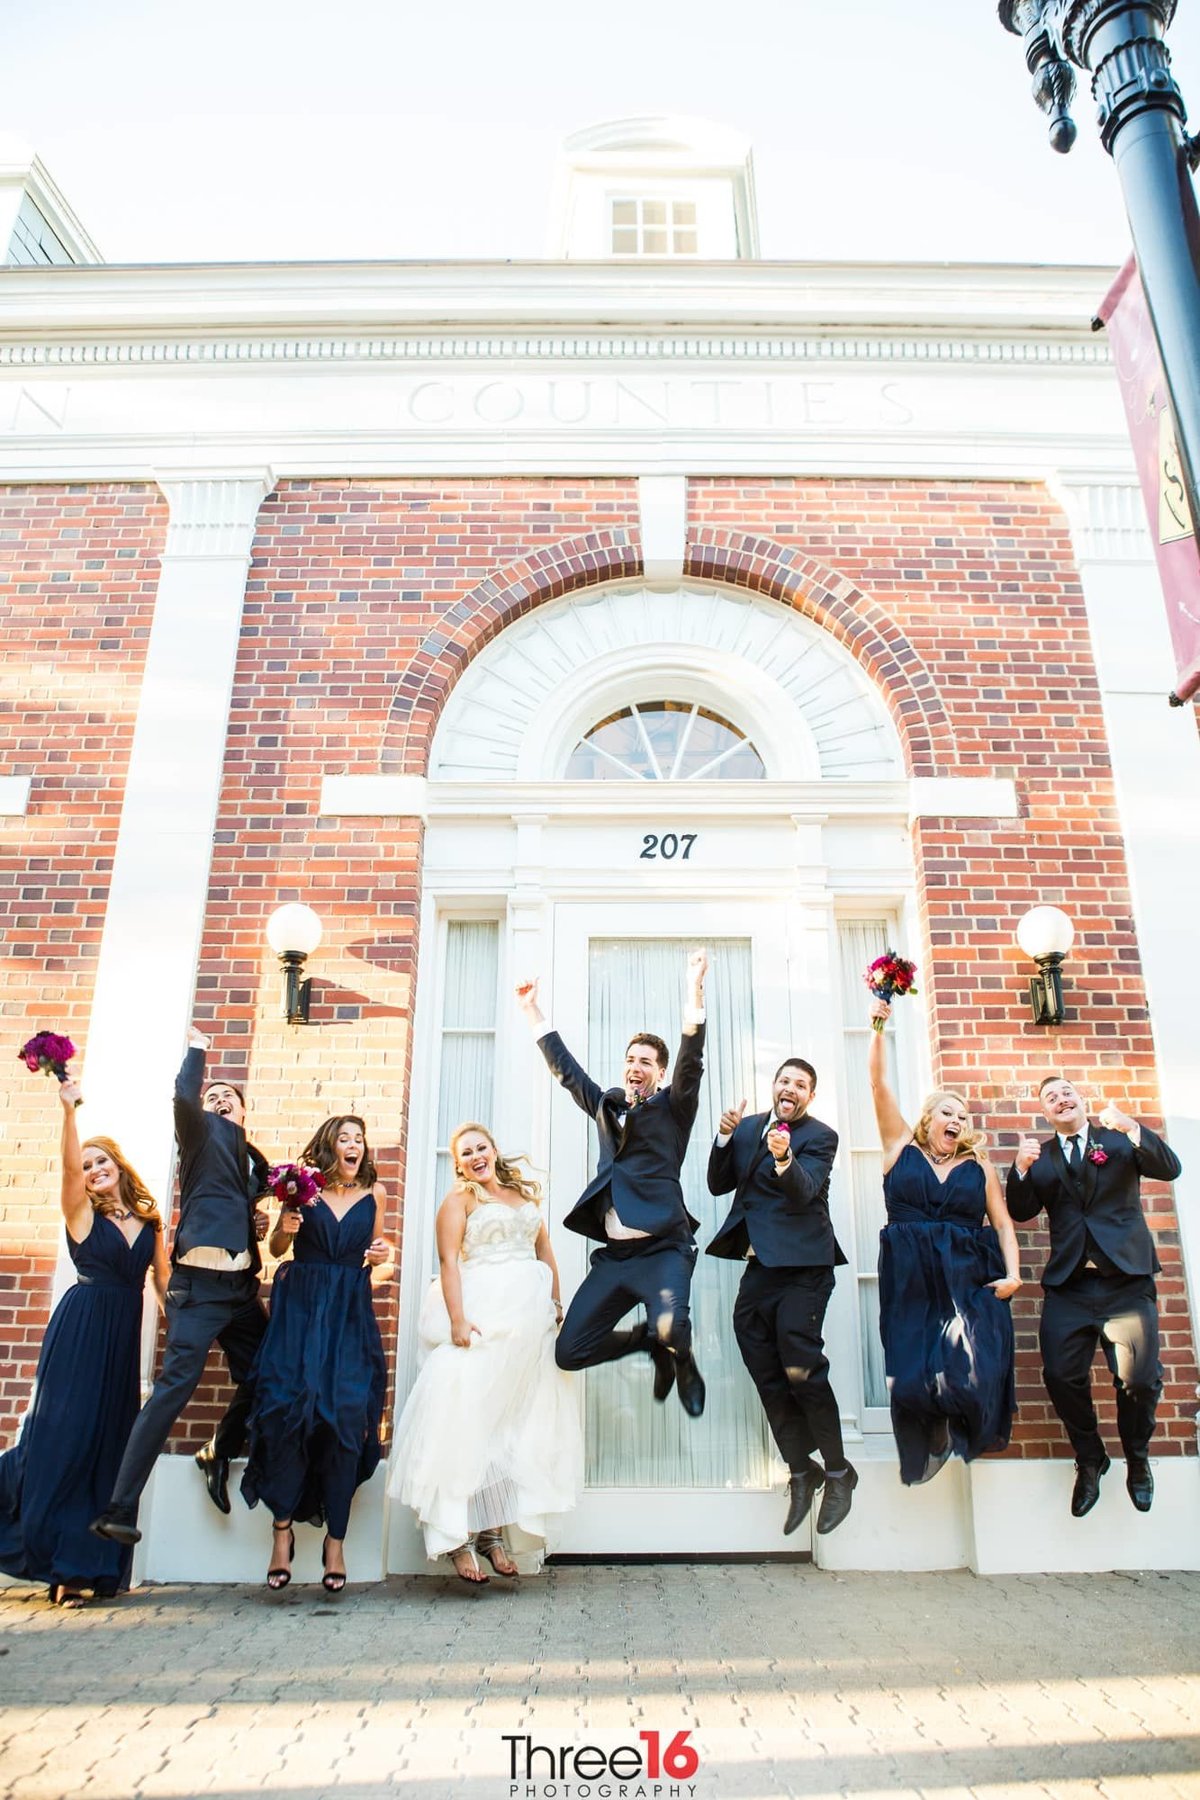 Wedding party jumps for joy during photo session